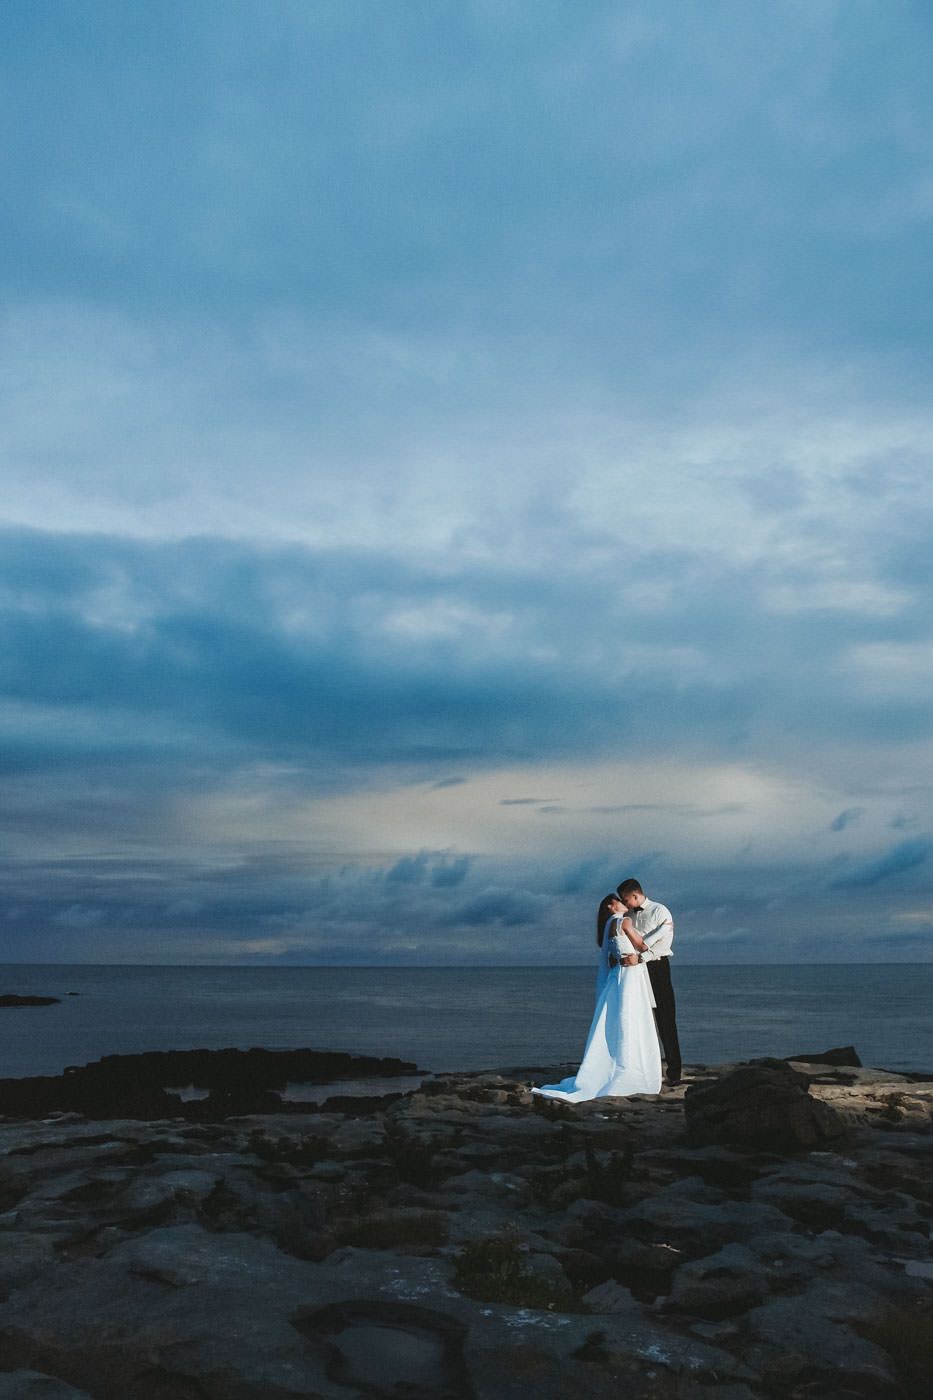 Wedding couple kissing on the rocky shore of Doolin Bay, evening clouds in the background and dramatic flash from the right lighting up the scene